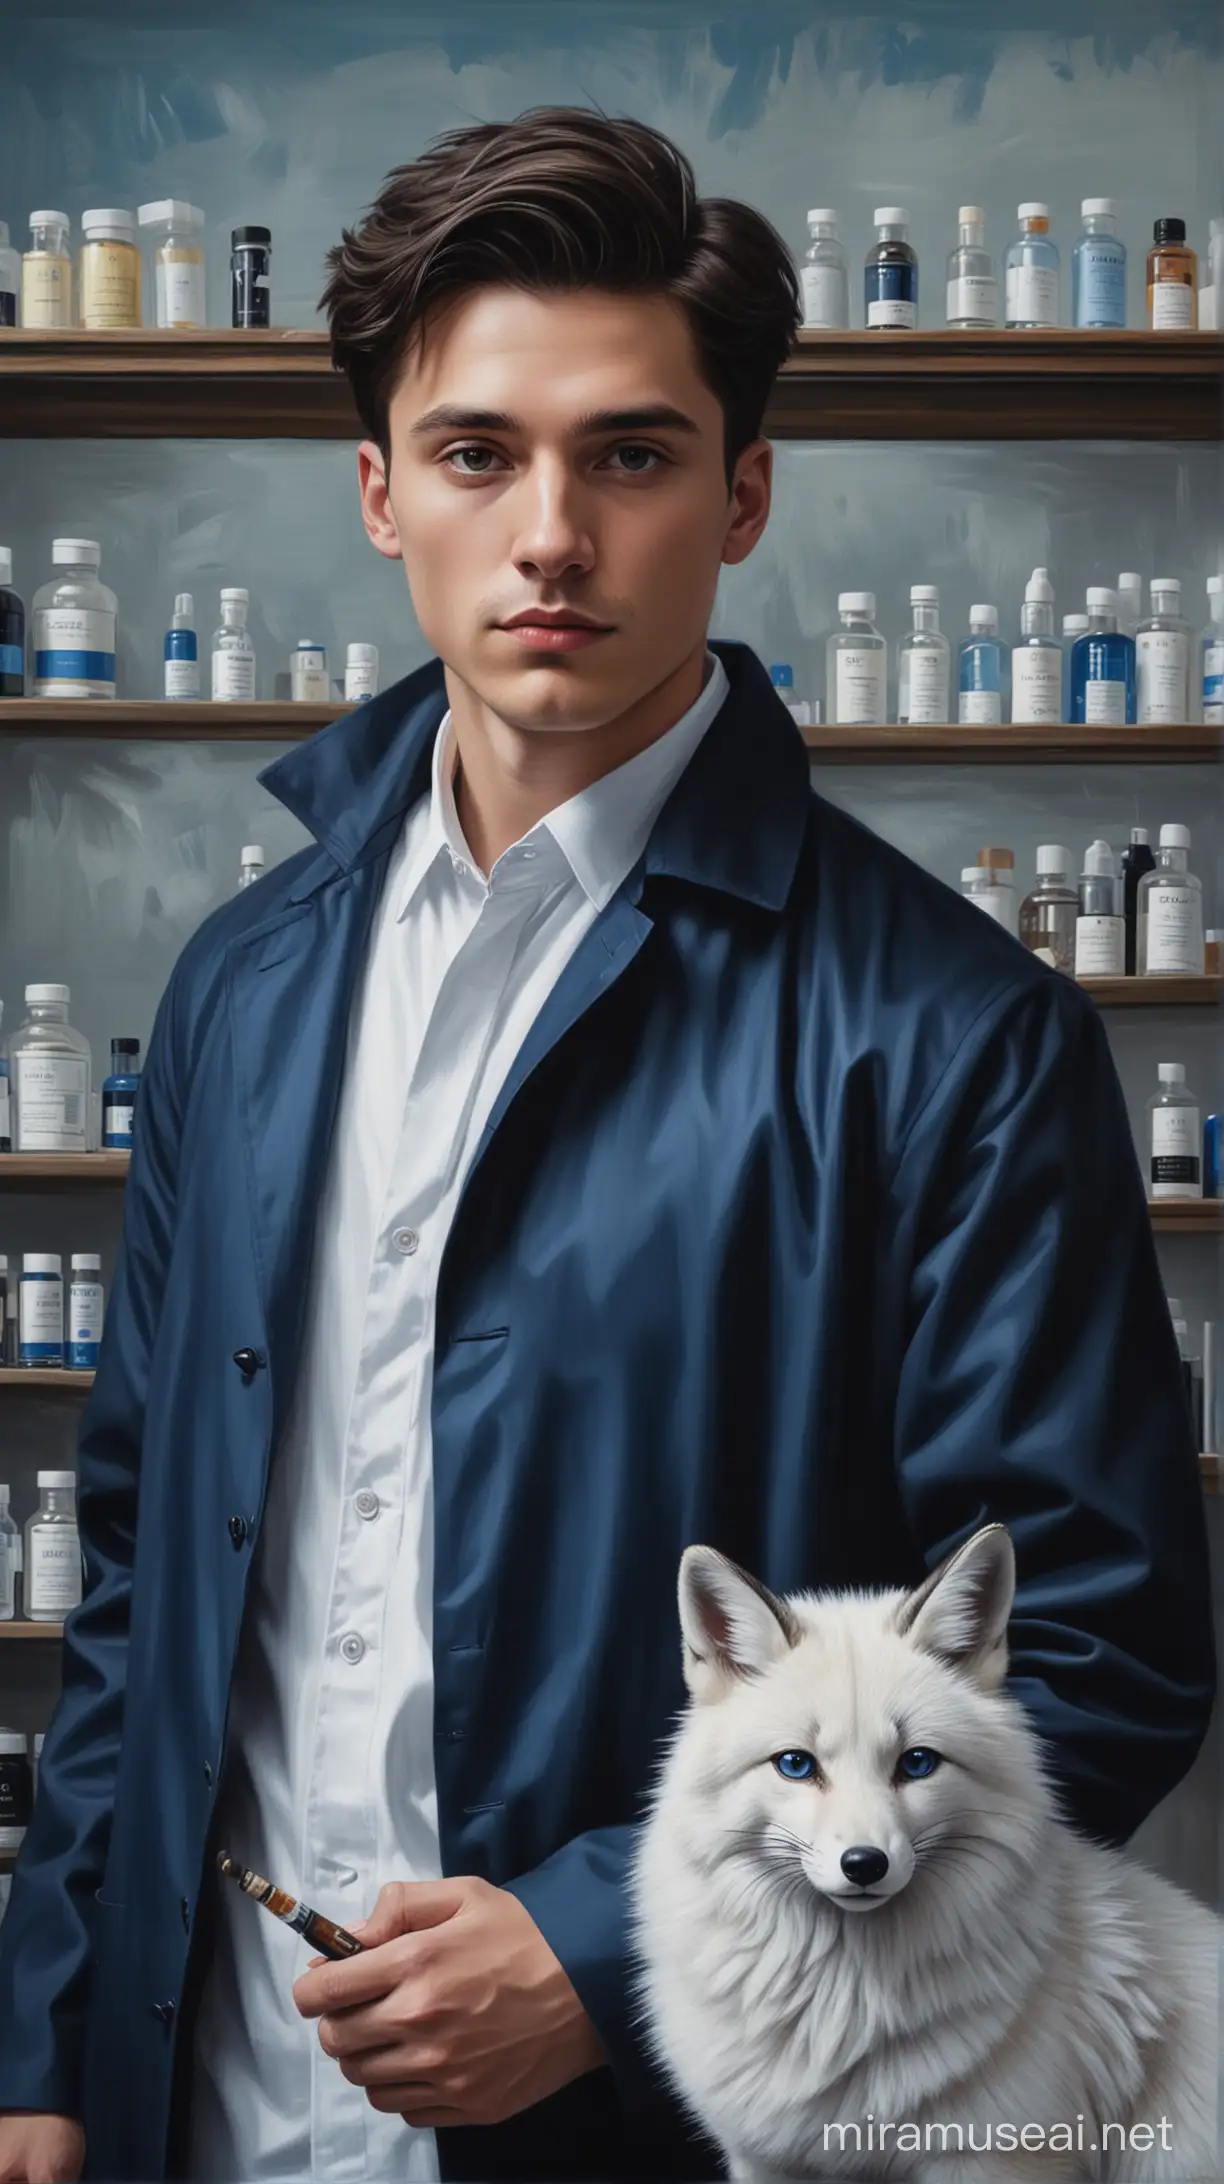 Oil element technic,realistic  painting of a pharmacy student, staring into the distance. he is wearing a blue coat with black accents. The background is a mix of blue , black, and white, with a white fox at the top left corner